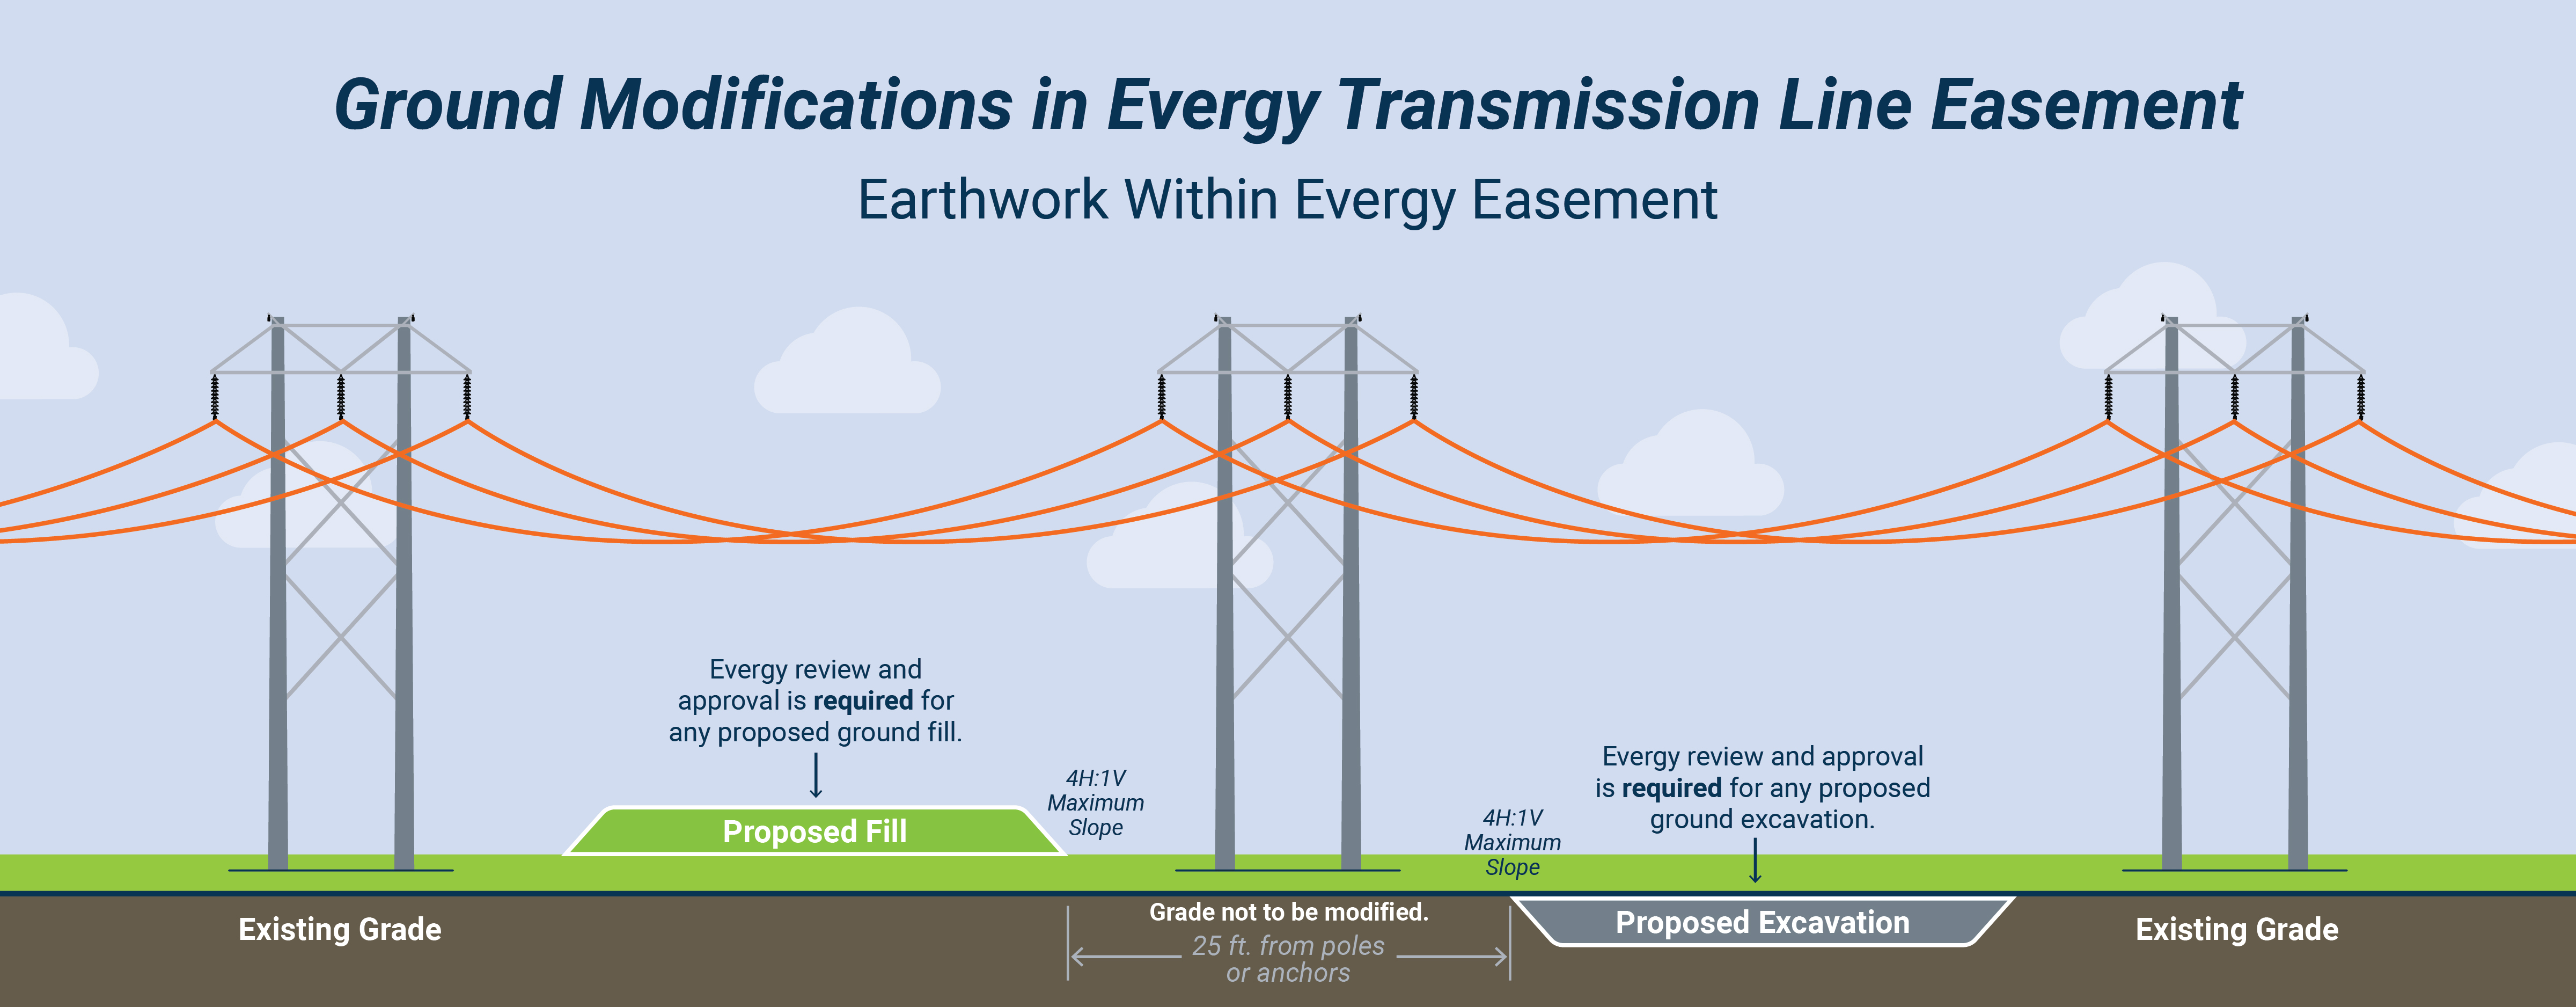 Ground Modification in Evergy Transmission Line Easement